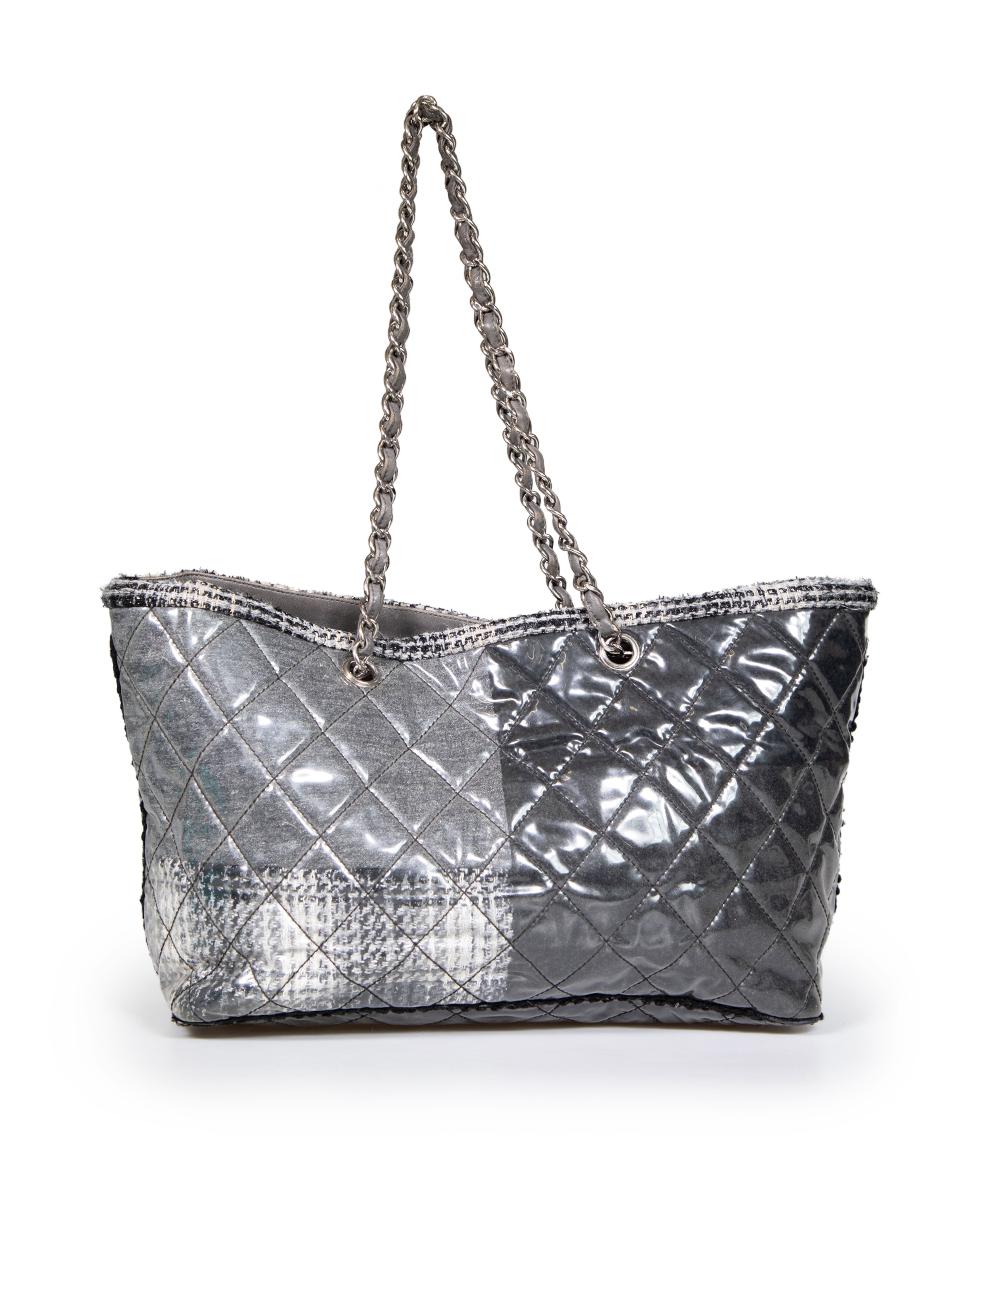 Chanel 2009-2010 Grey Quilted Vinyl & Tweed Funny Patchwork Tote In Good Condition For Sale In London, GB